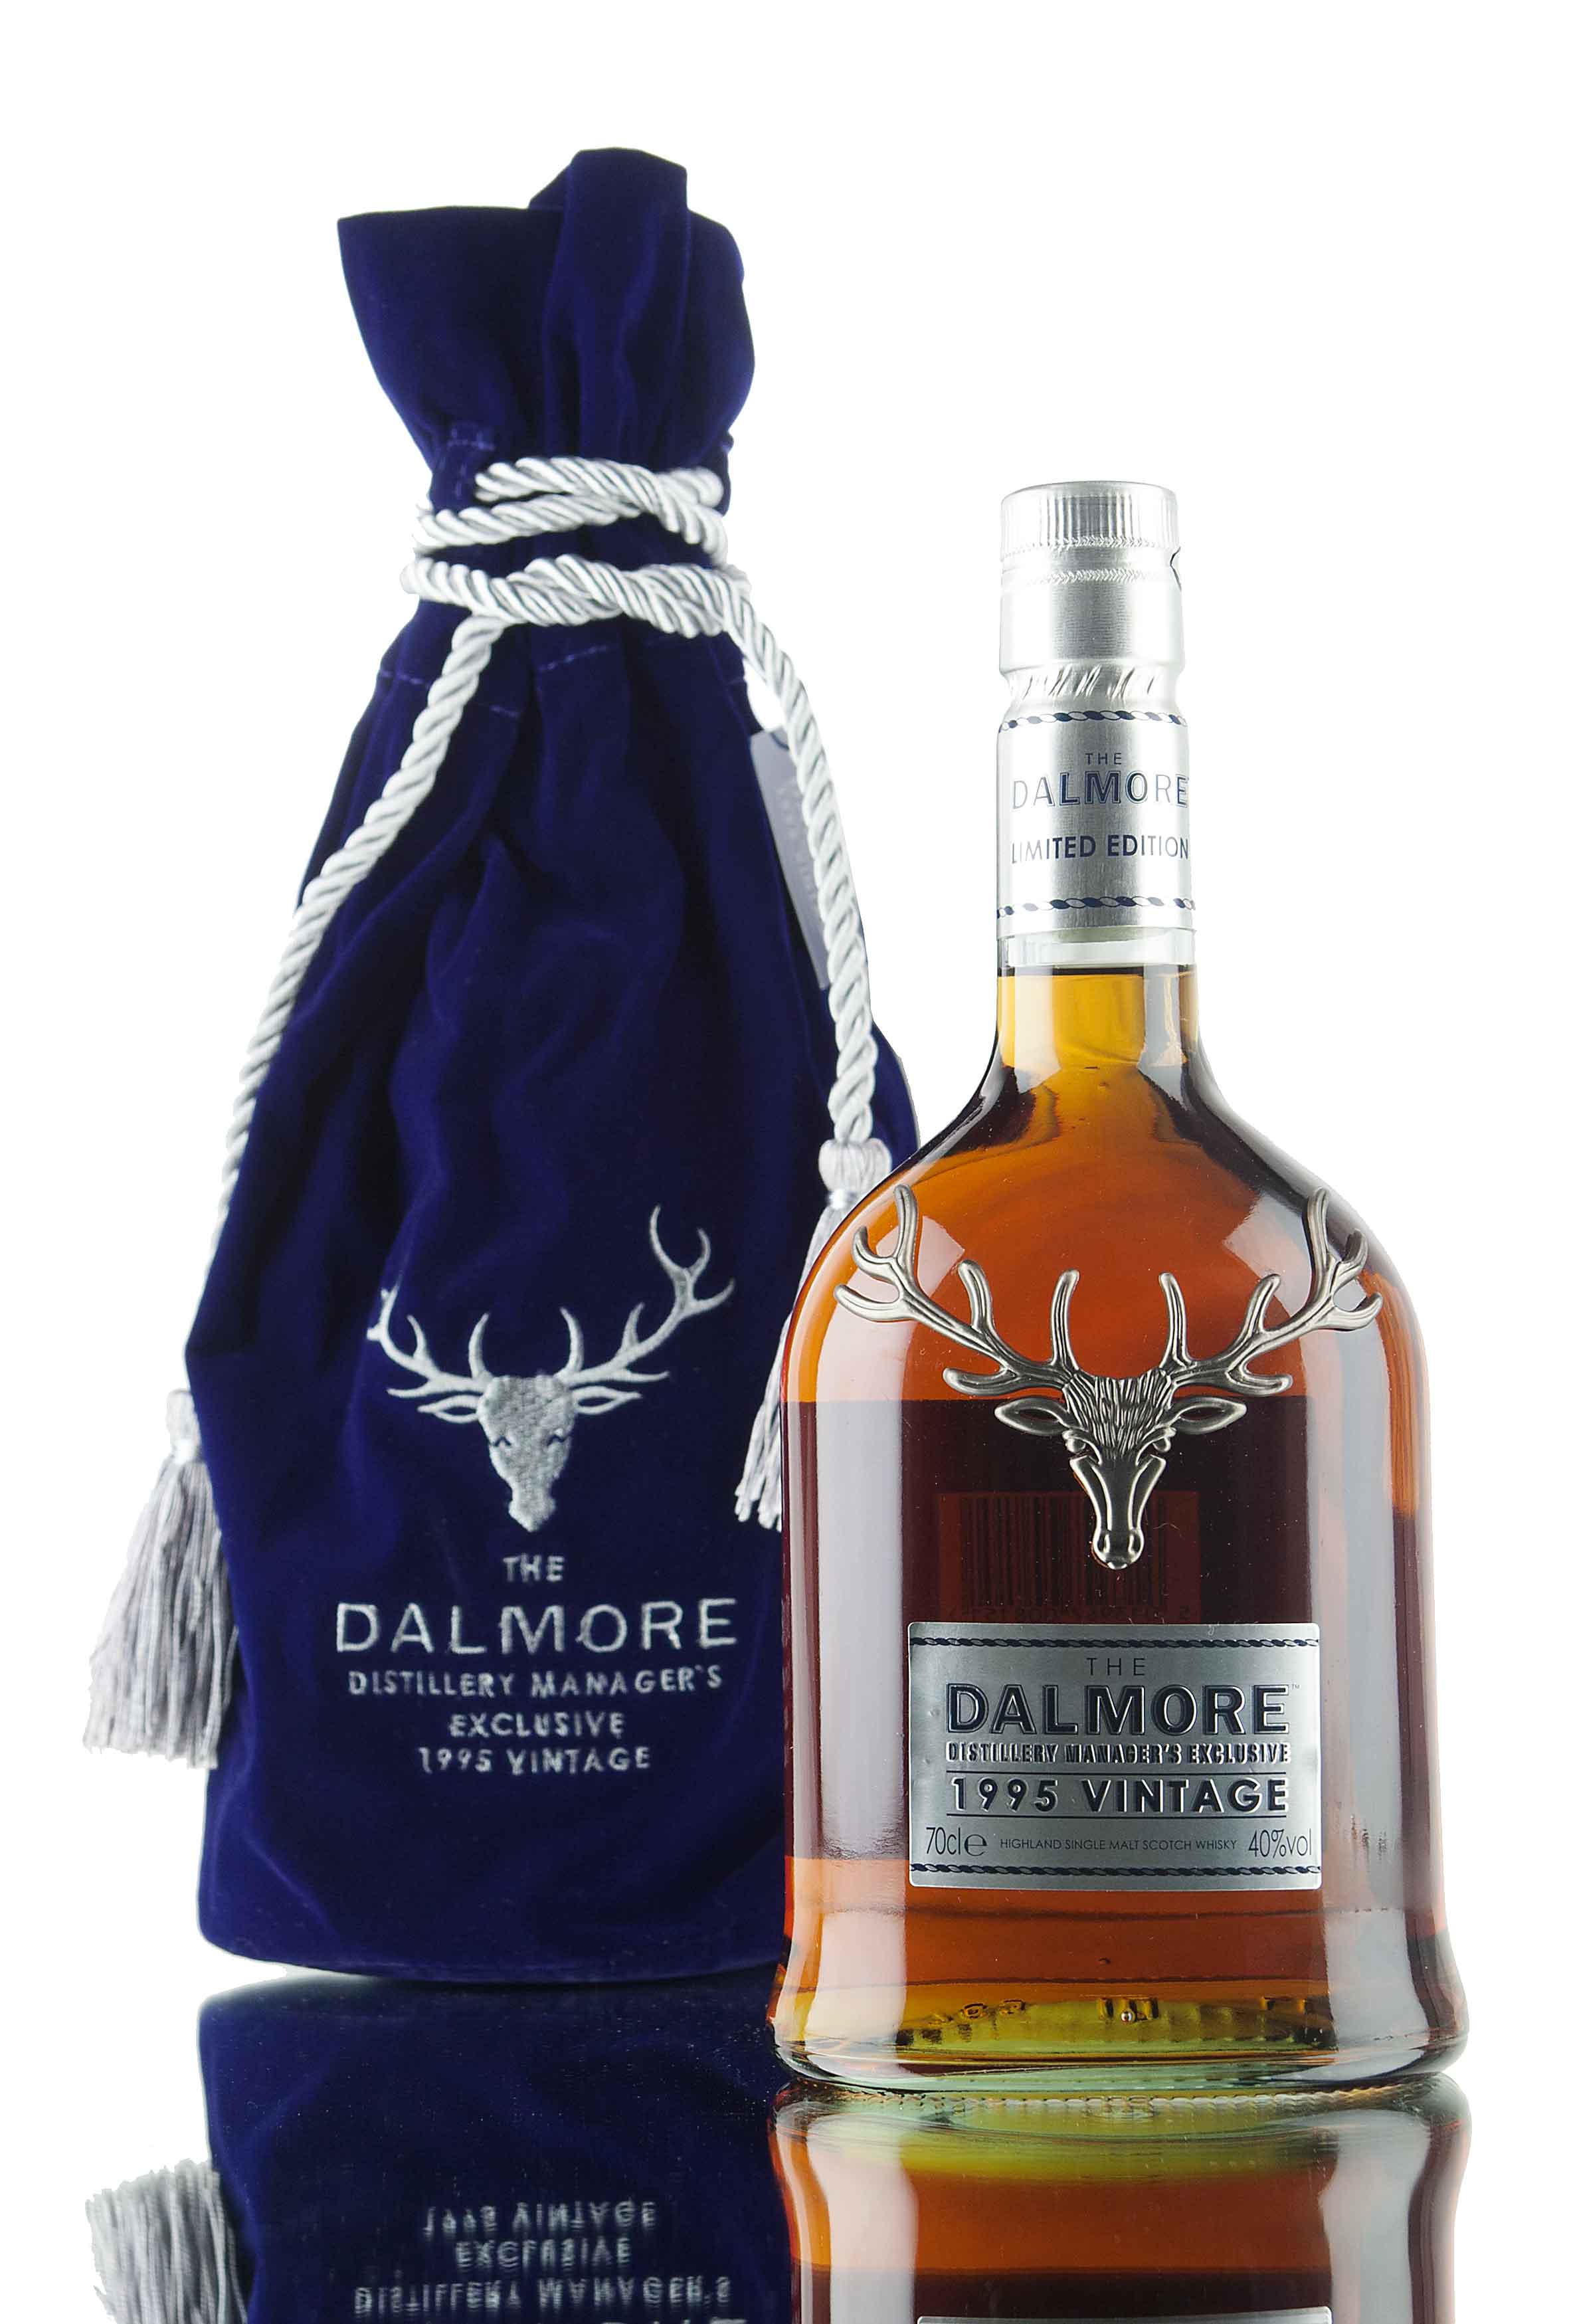 Dalmore 1995 Distillery Manager's Exclusive